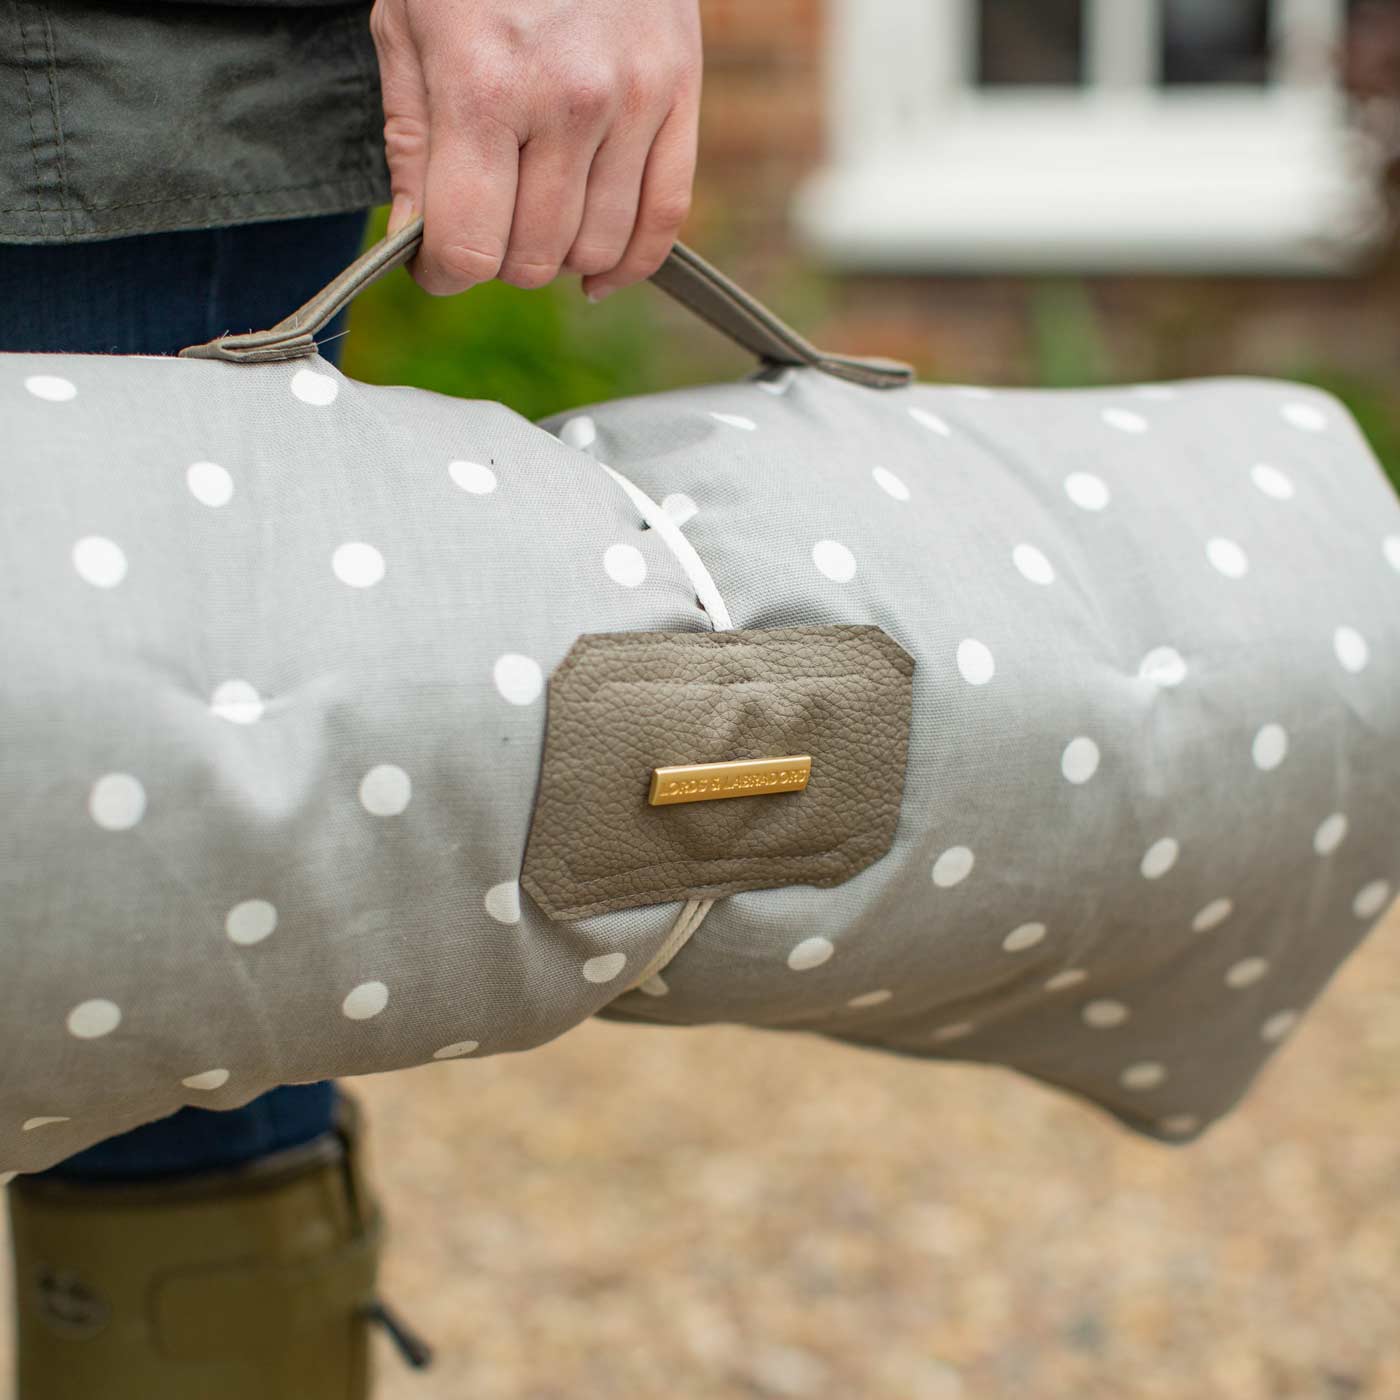 Lords & Labradors Travel Mat in Grey Spot